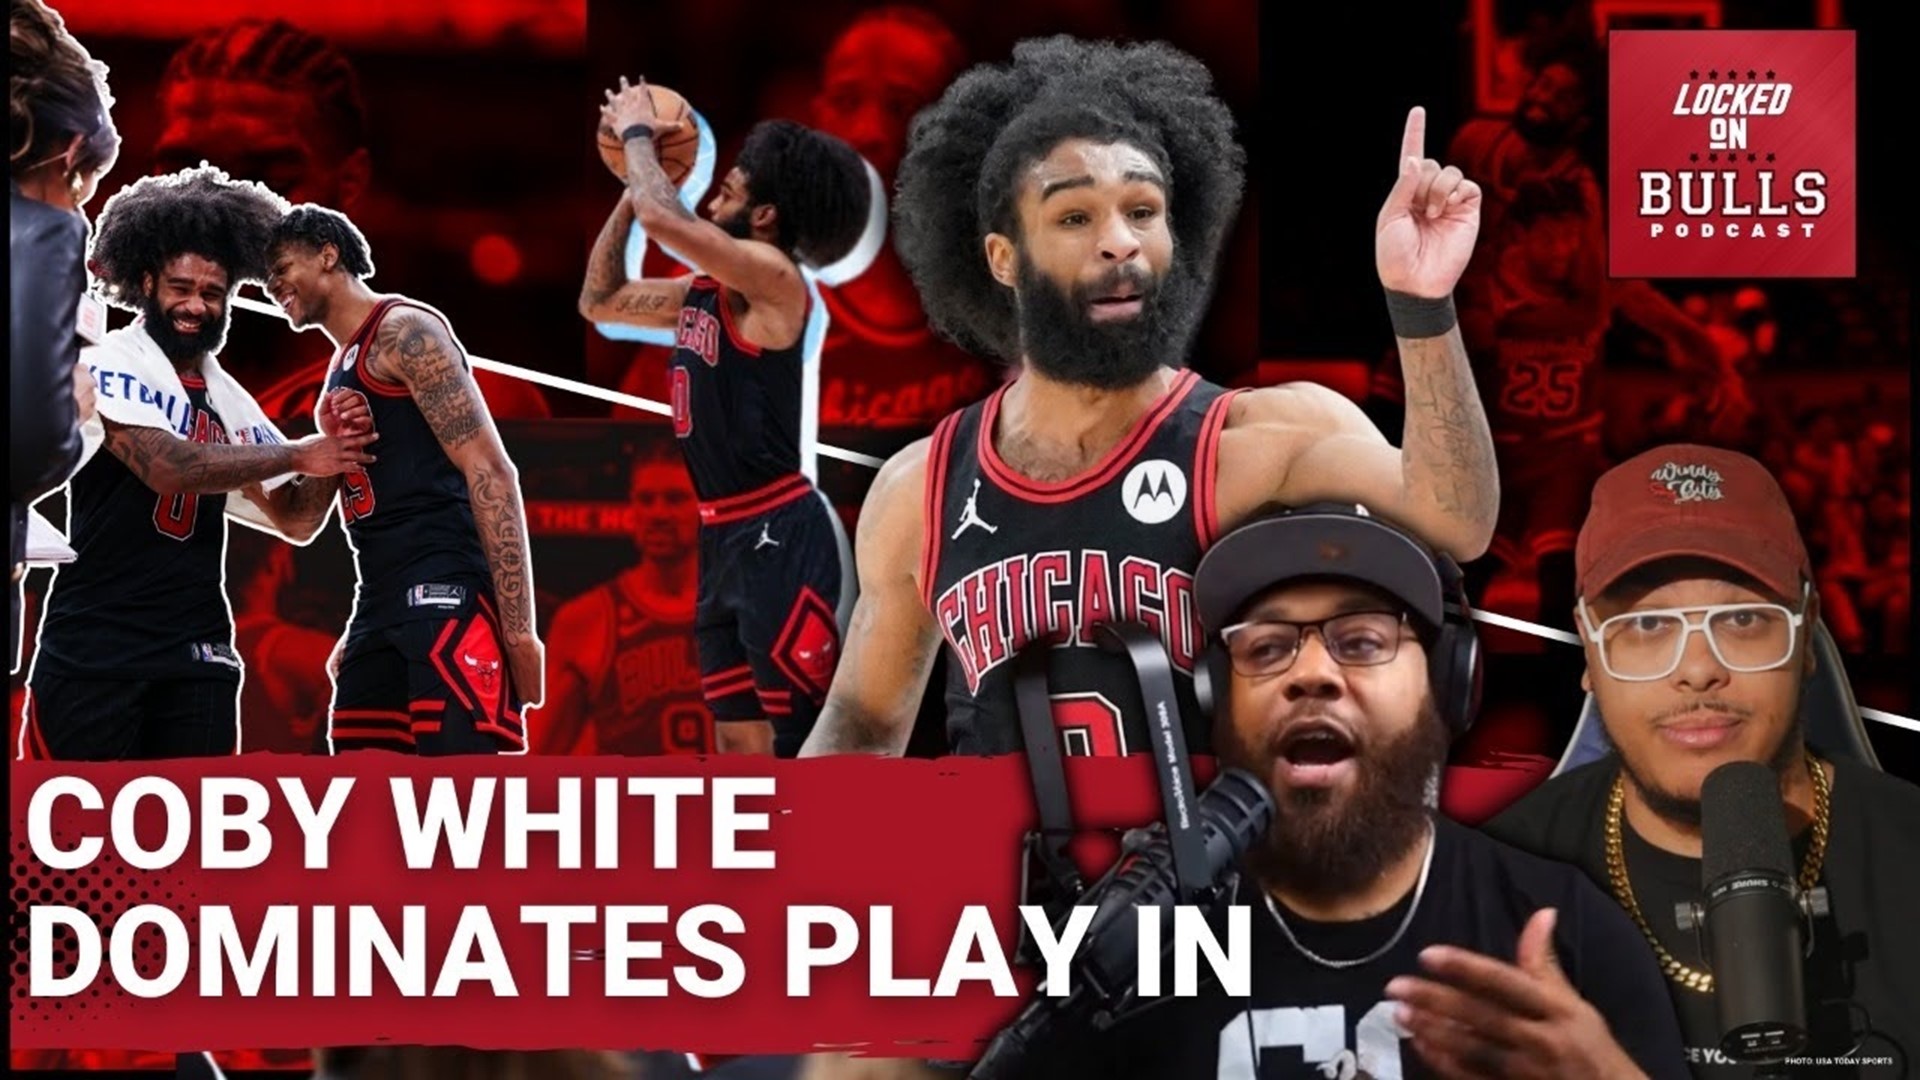 Join hosts Haize and Pat The Designer on Locked On Bulls as they delve into the exhilarating matchup between the Chicago Bulls and the Atlanta Hawks.